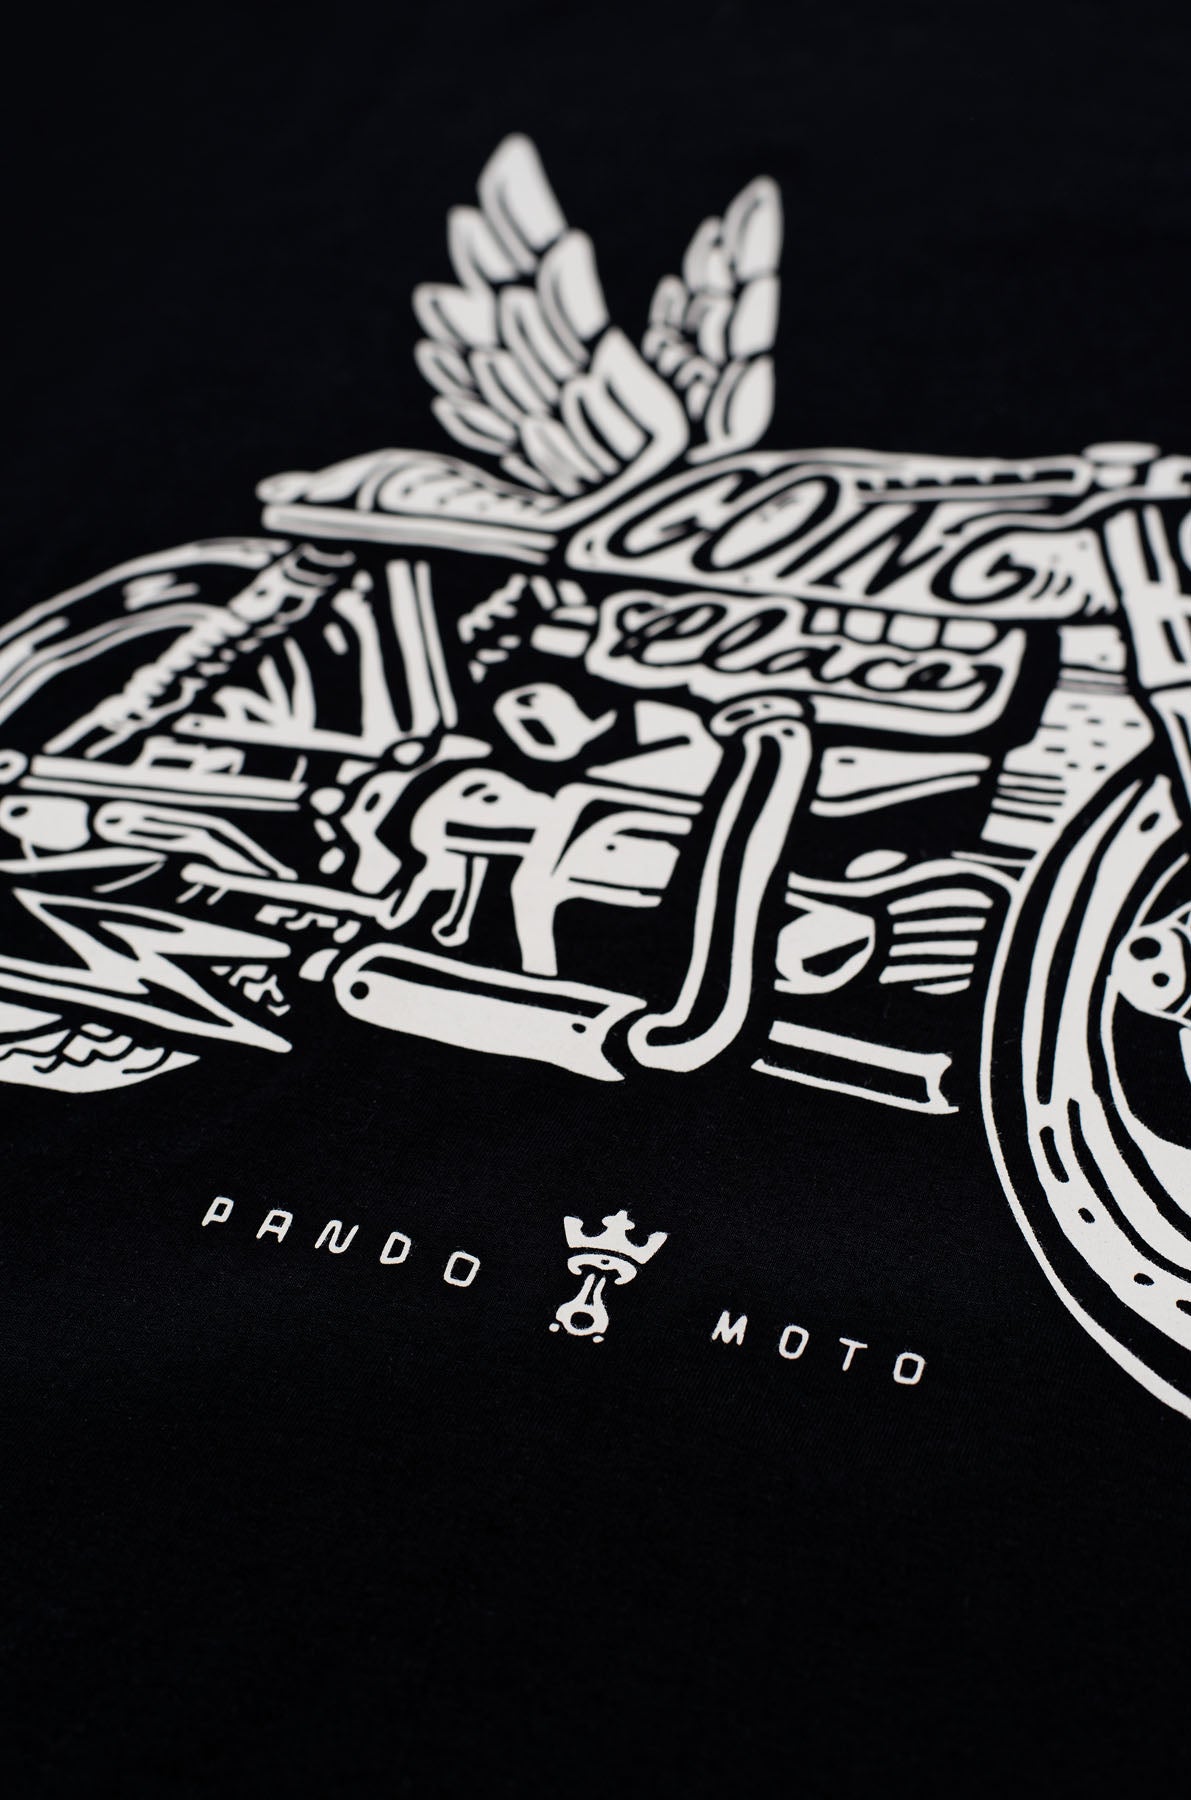 Pando Moto motorcycle t-shirt Going Places close up